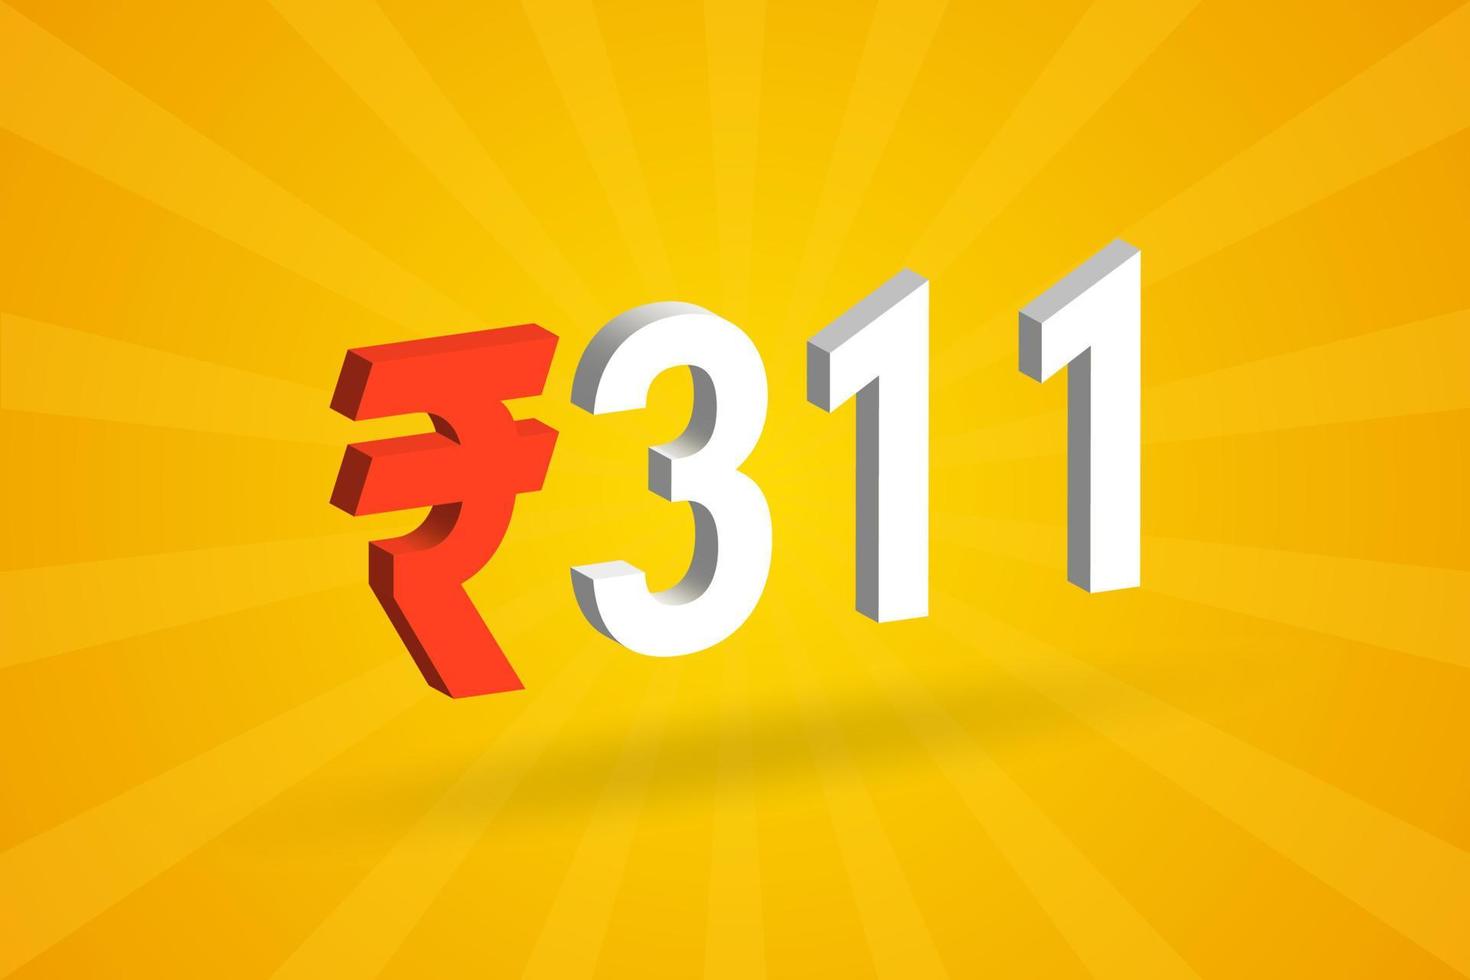 311 Rupee 3D symbol bold text vector image. 3D 311 Indian Rupee currency sign vector illustration